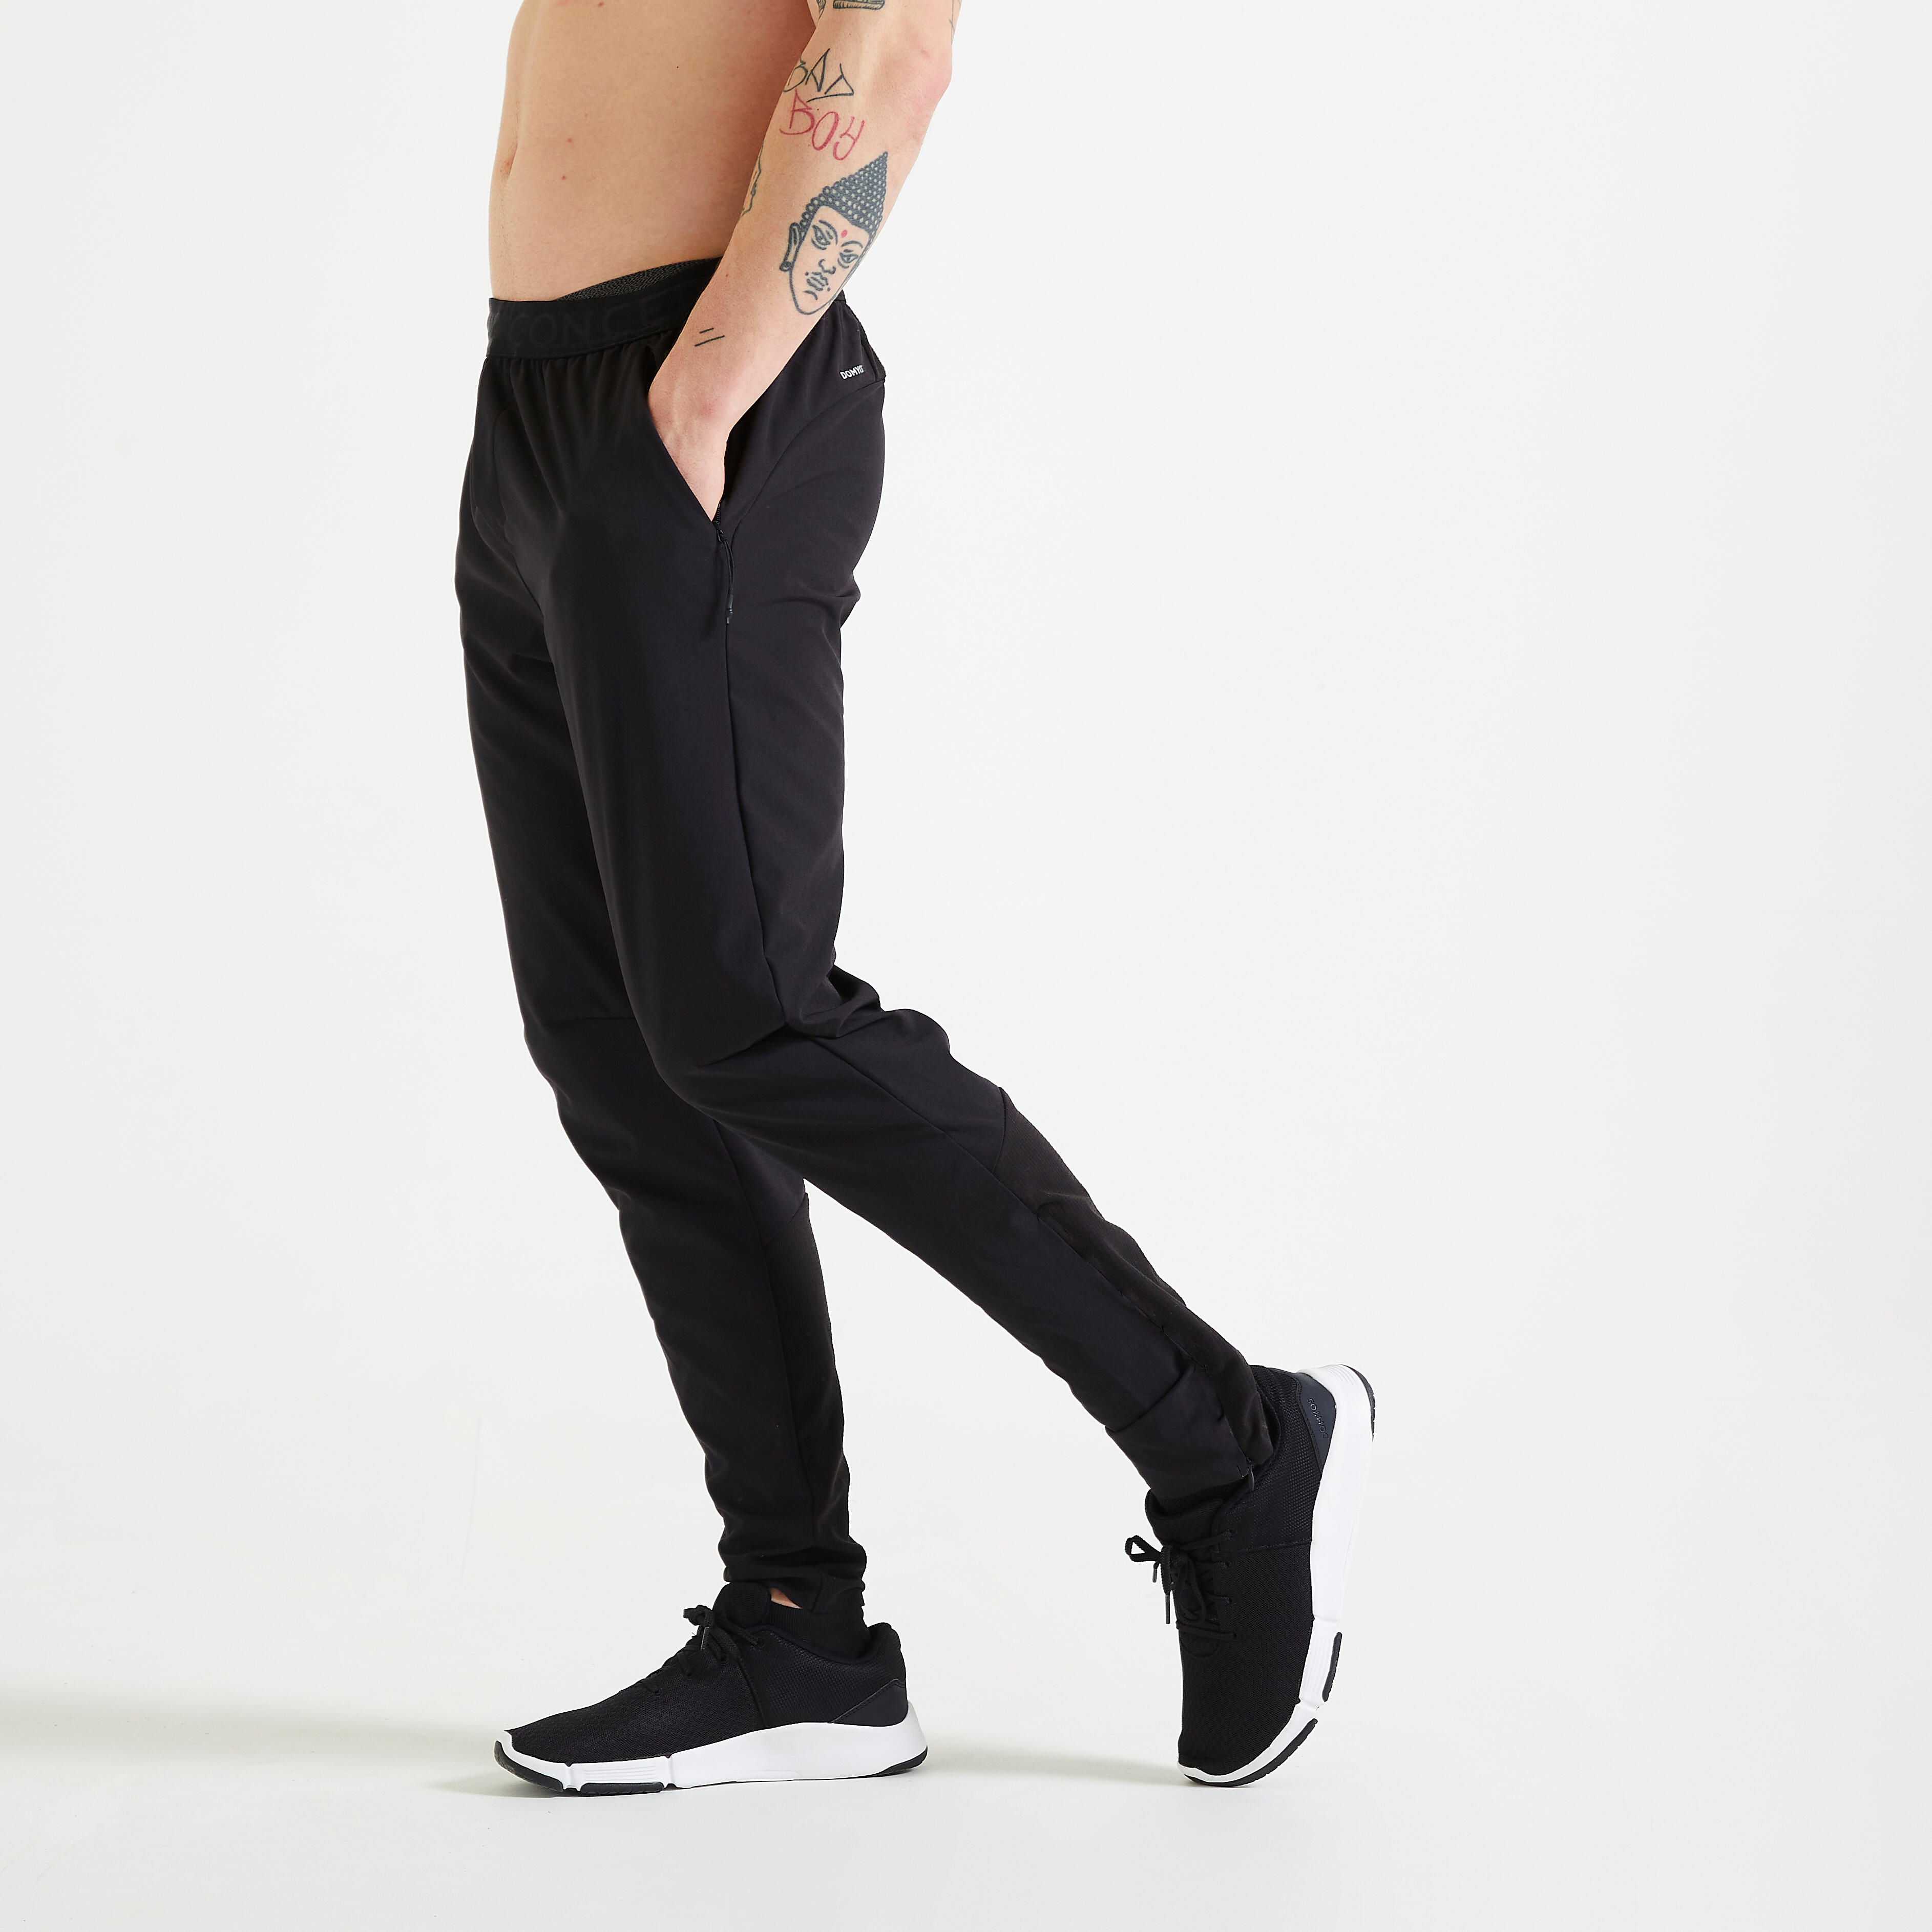 Domyos Black Mens Slim Fit Recycled Polyester Fitness Track Pants at Rs  999/piece | A2 0-Chikkajala Village | Bengaluru | ID: 23639343630